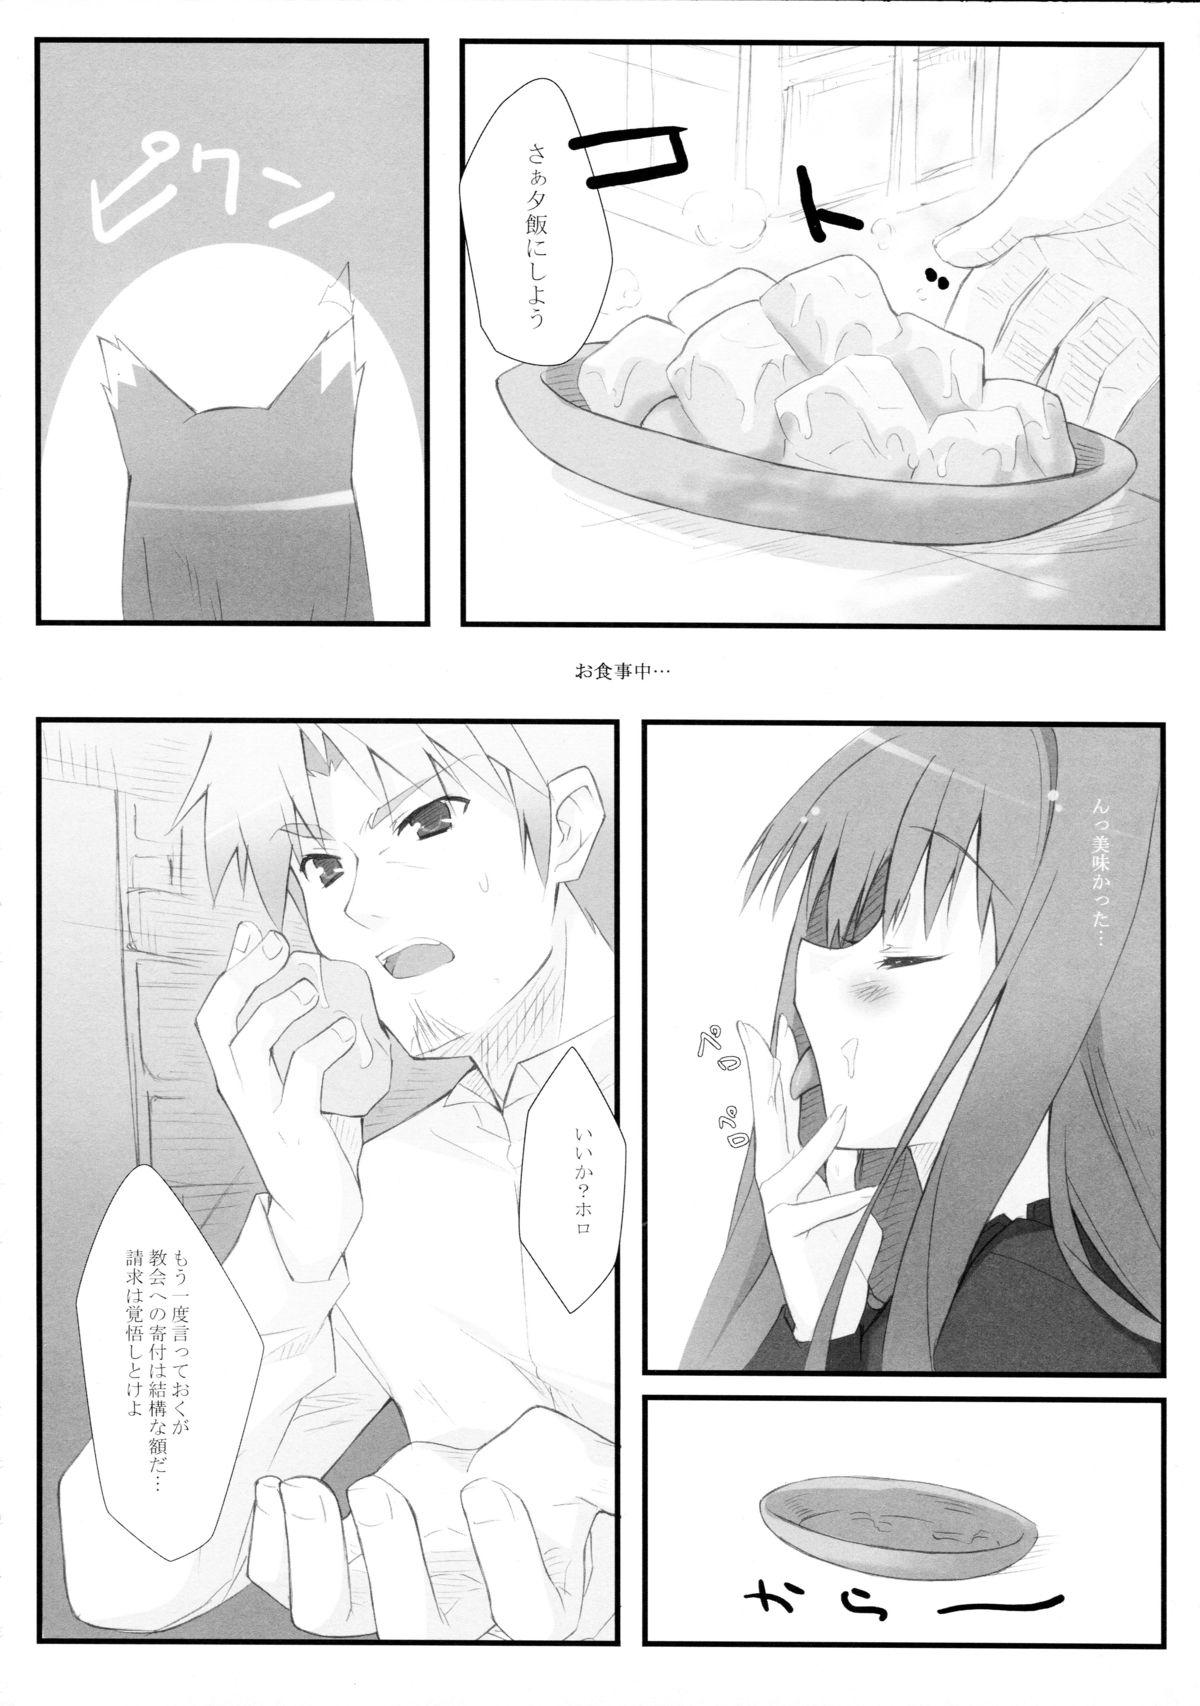 Licking Pussy Komugi to Hito to Ookami to - Spice and wolf Teentube - Page 4